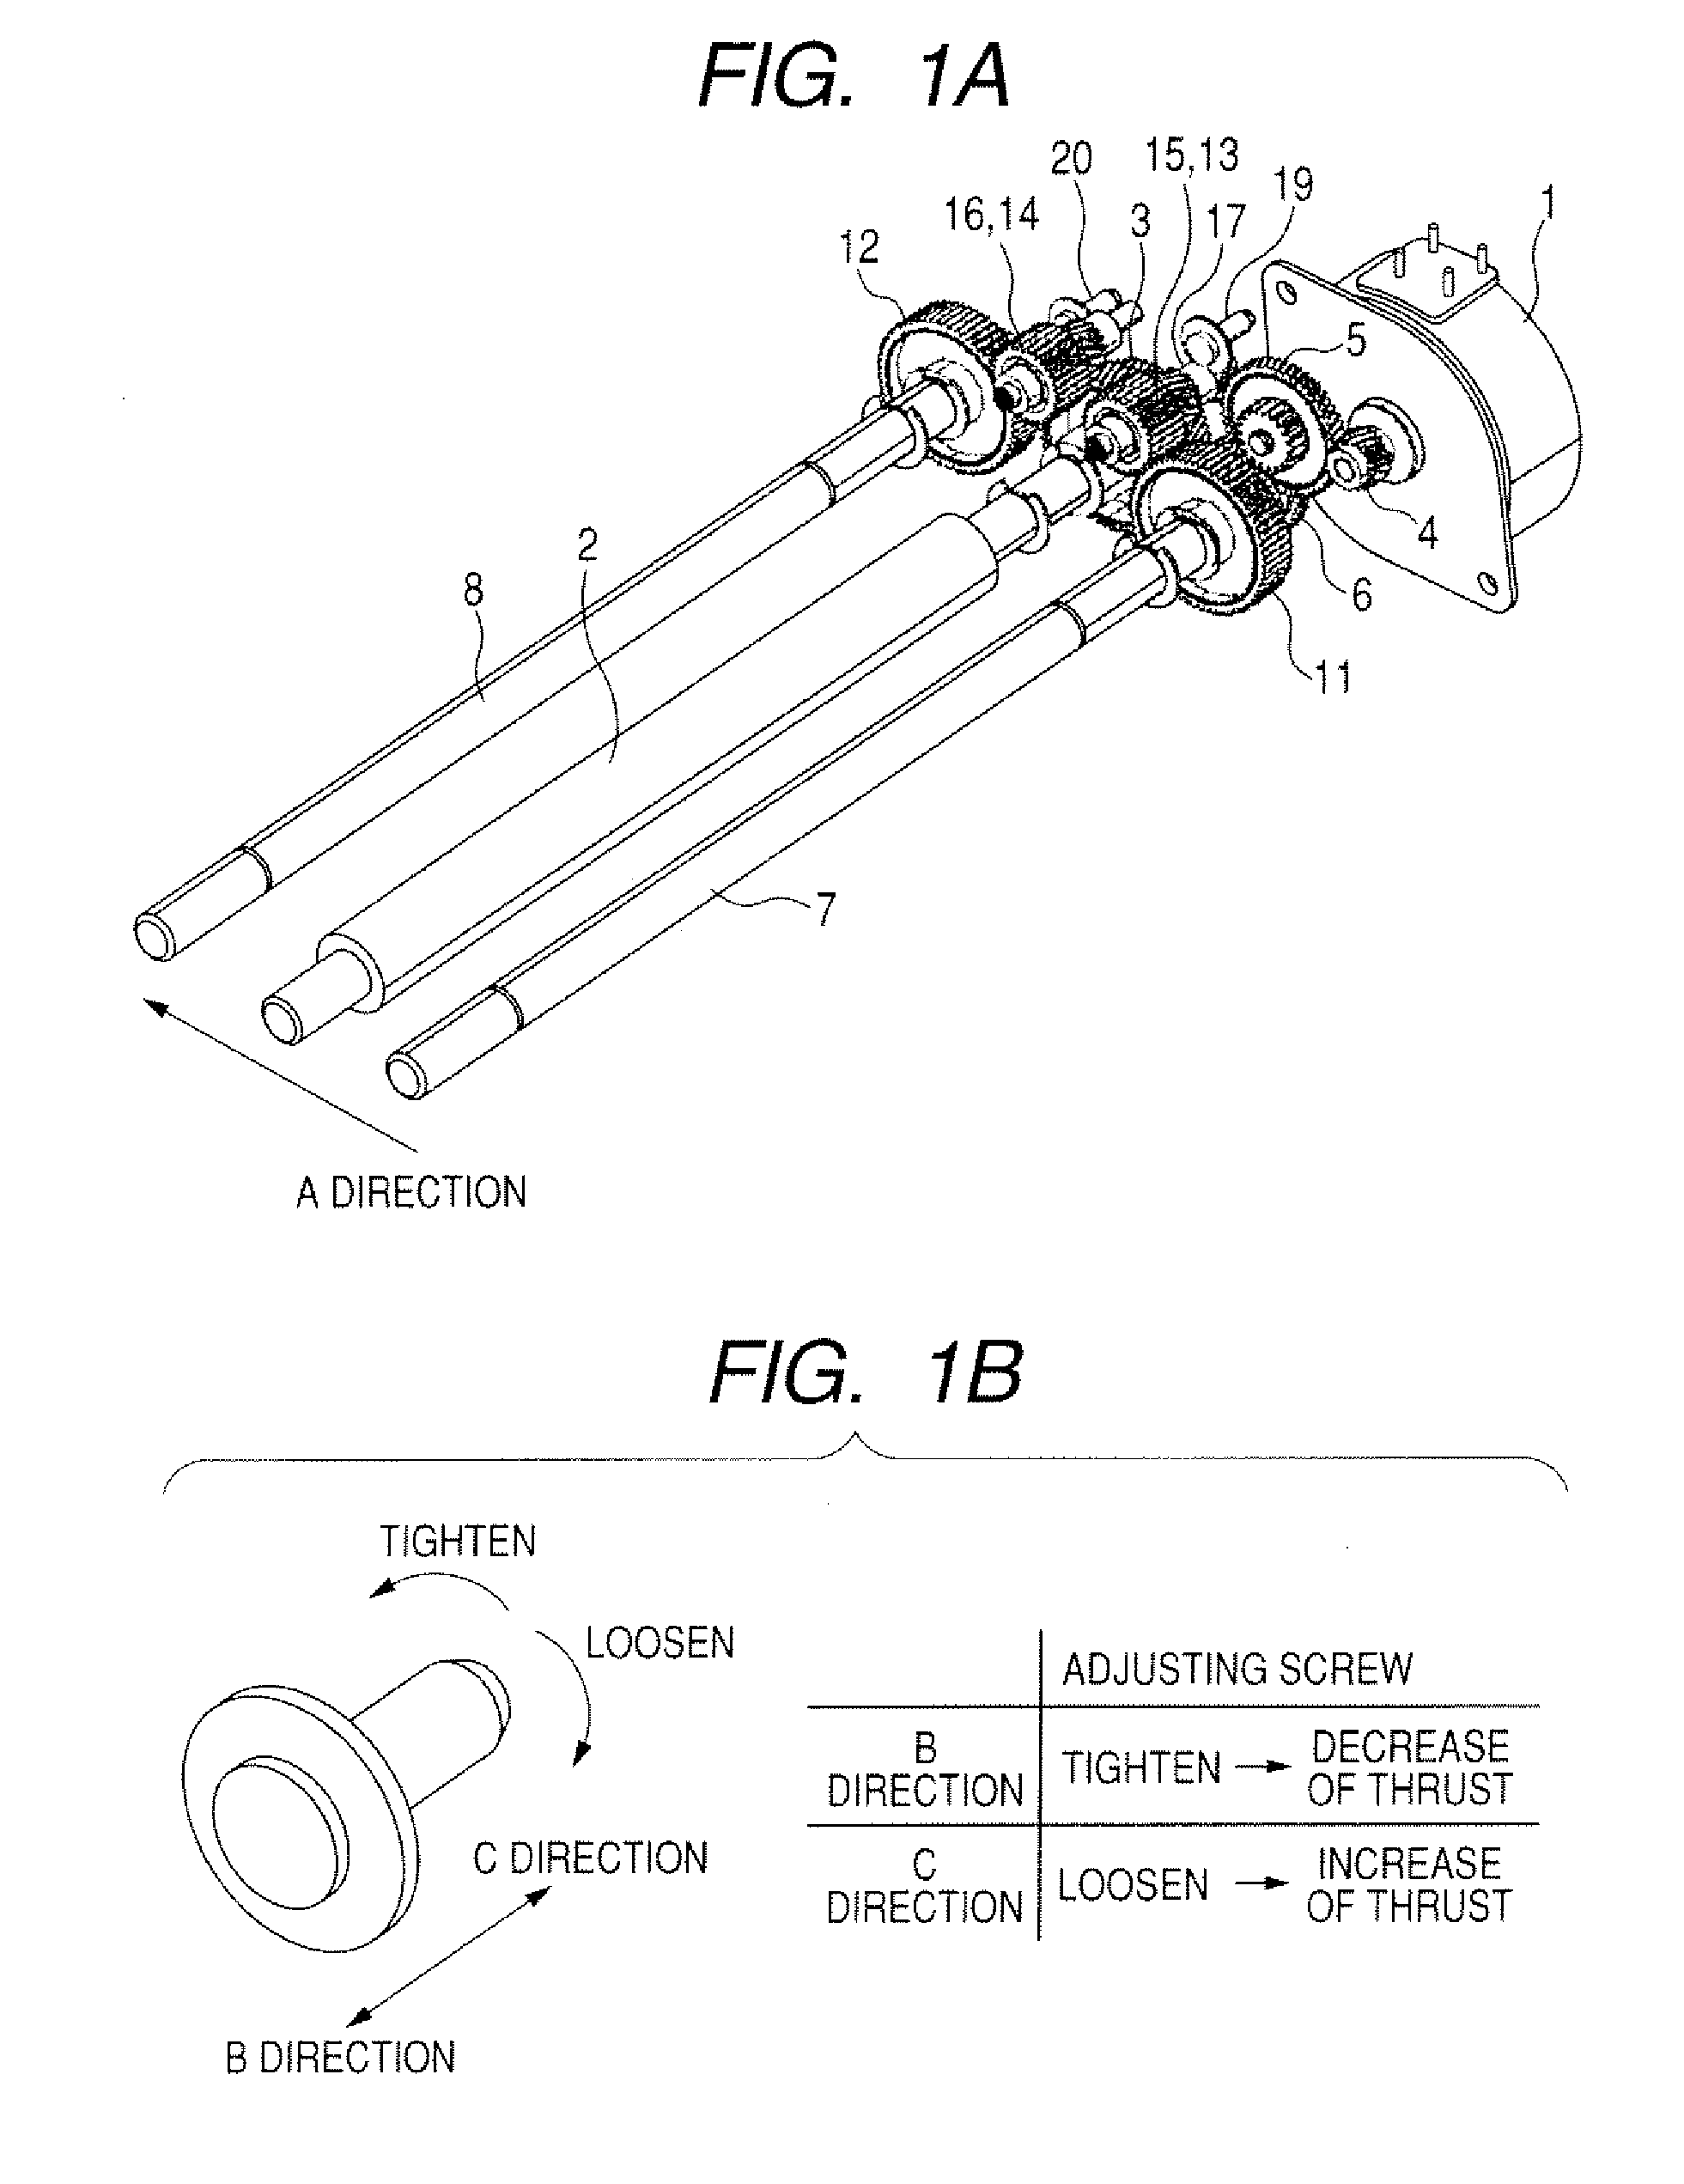 Printer and method of adjusting conveying distance of recording sheet